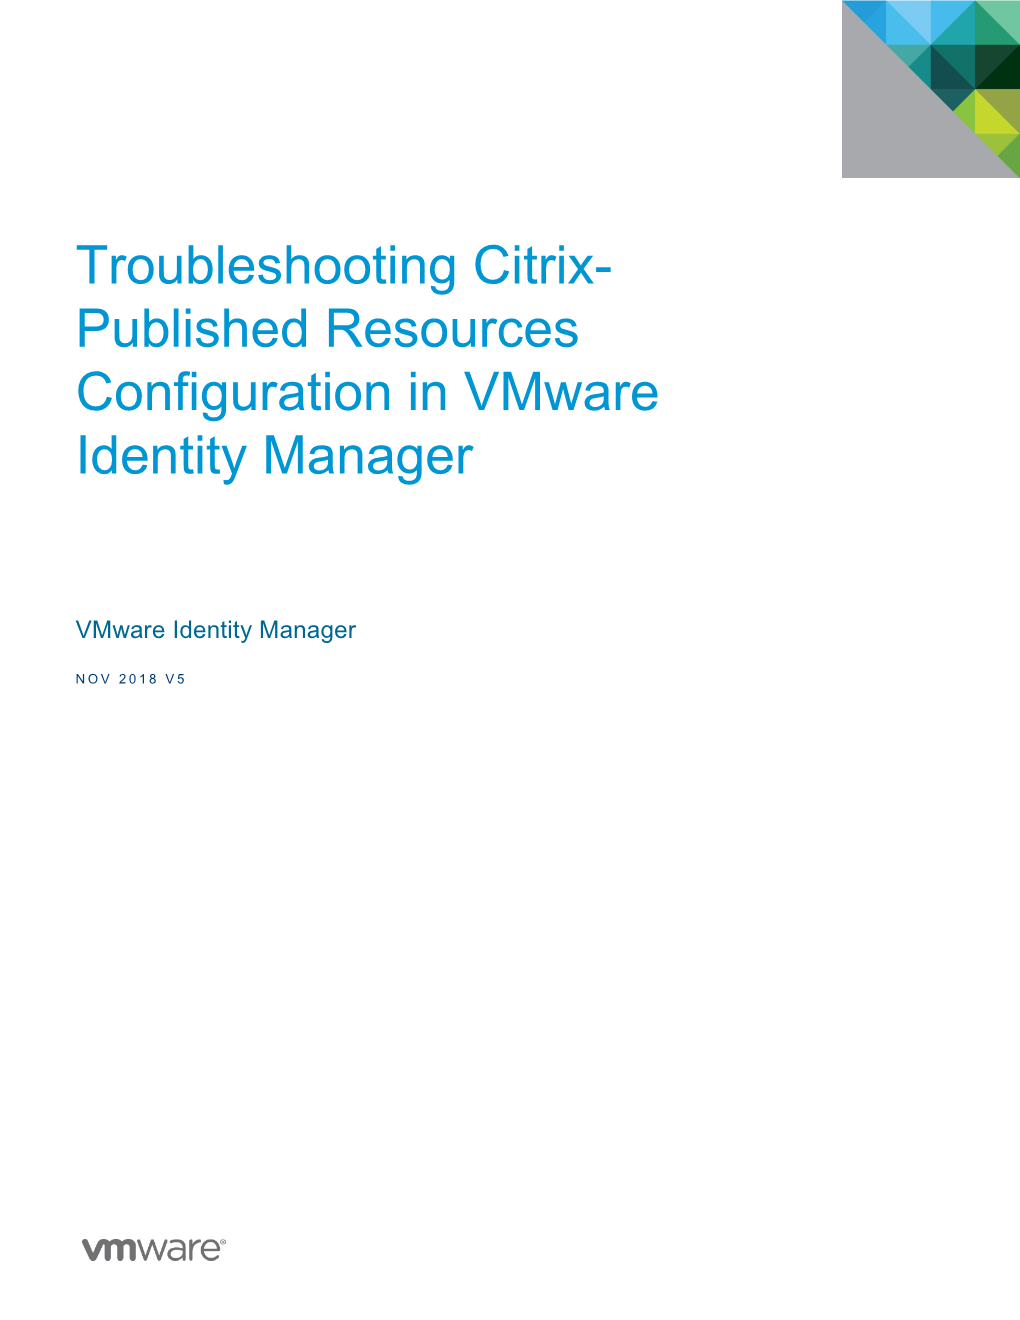 Troubleshooting Citrix- Published Resources Configuration in Vmware Identity Manager